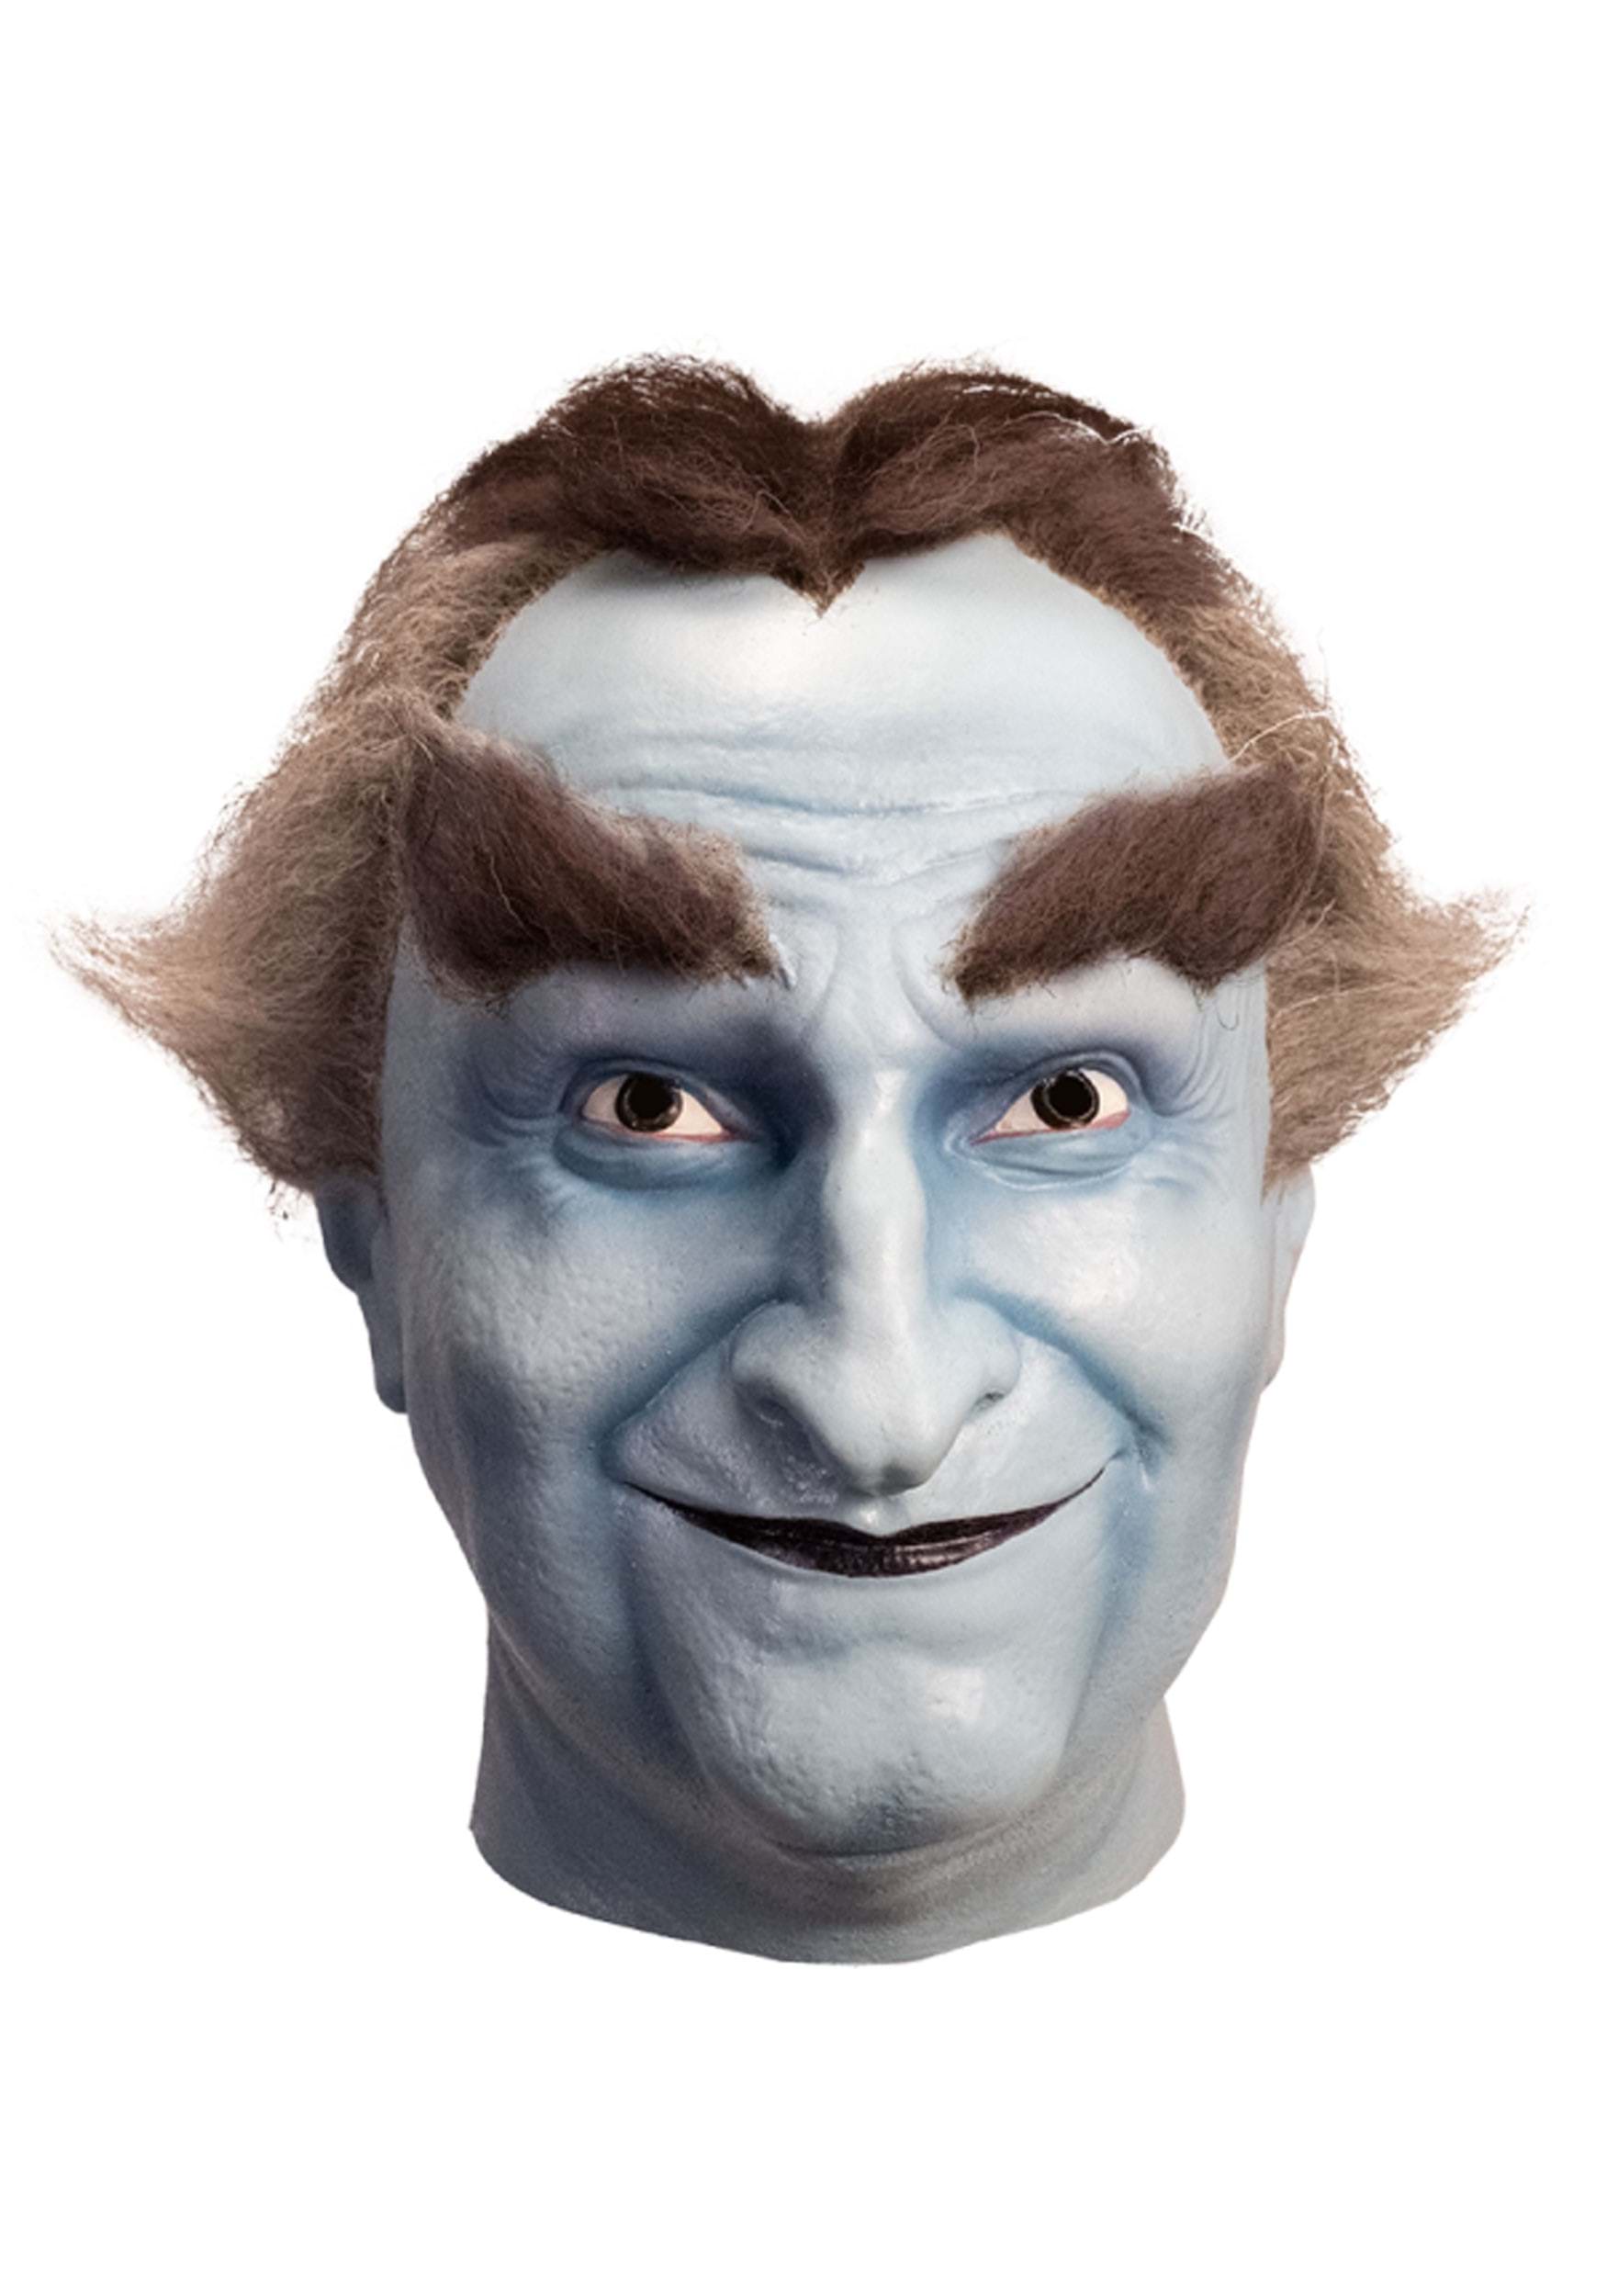 Photos - Fancy Dress Trick or Treat Studios The Munsters Grandpa Munster Mask for Adults Brown&